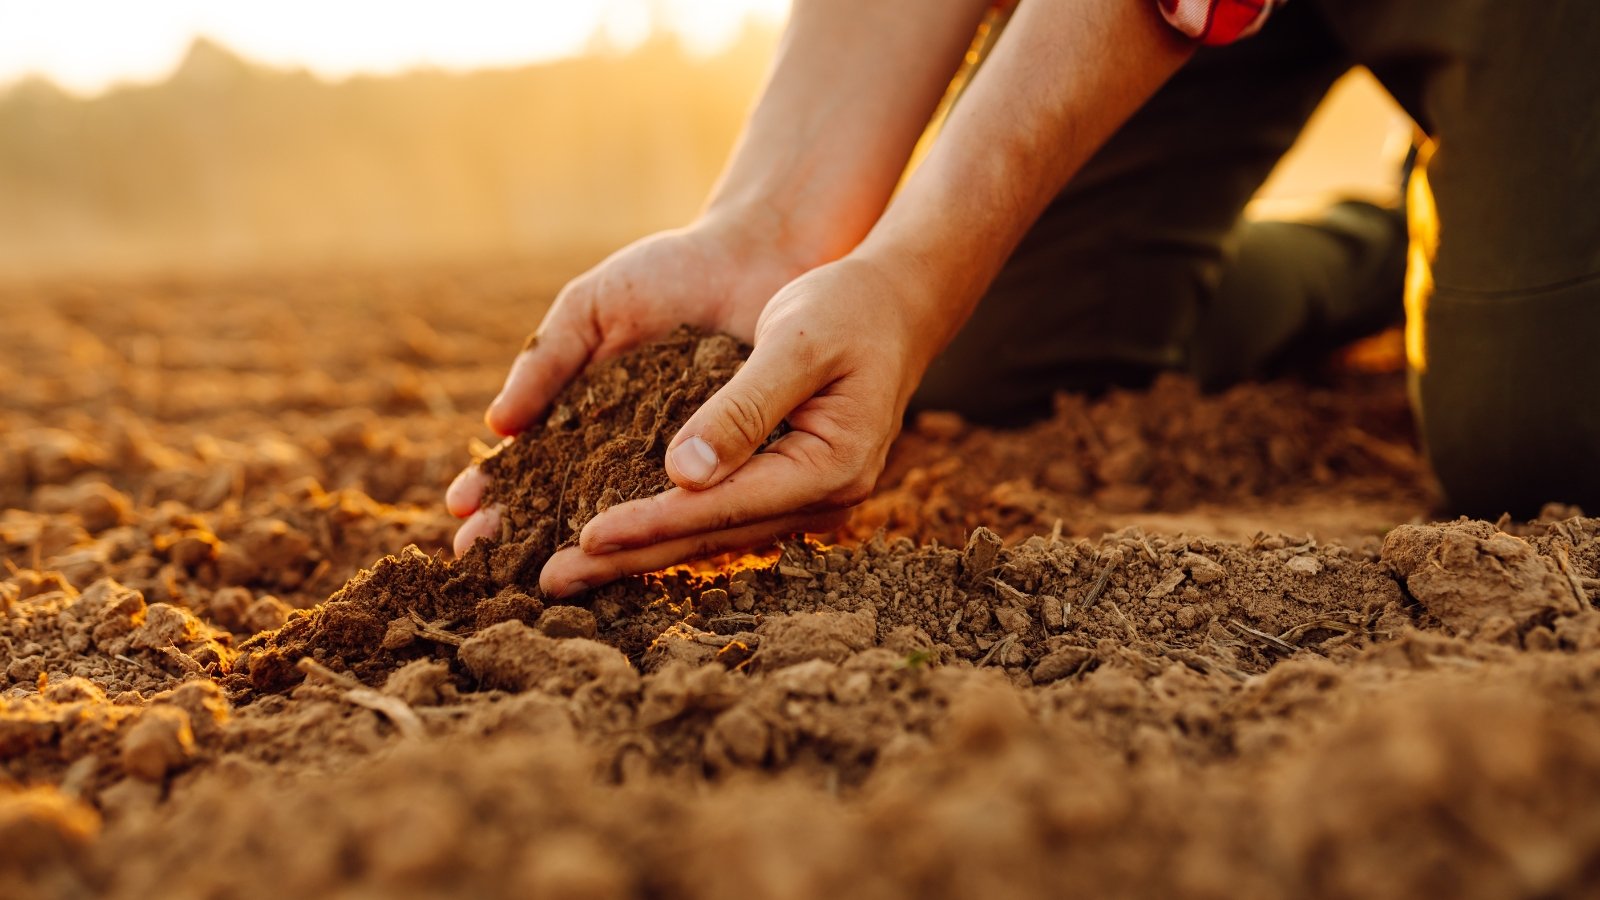 Close-up of a woman's hands gently sifting through the soil, feeling its texture and moisture content as sunlight streams through the garden.